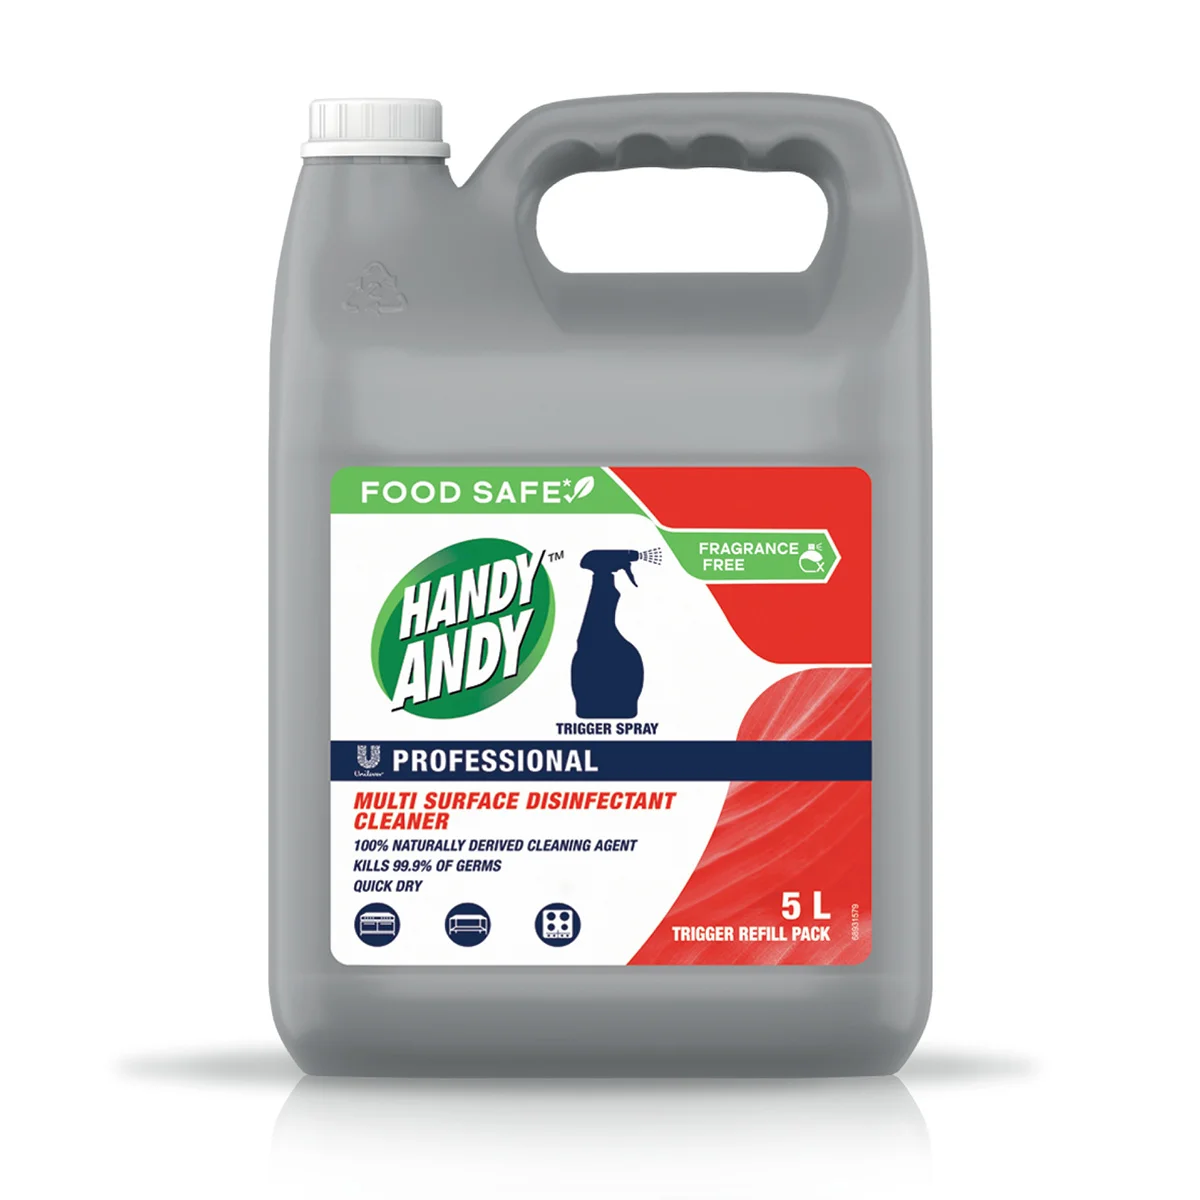 Handy Andy Professional Multi Surface Disinfectant Cleaner 5 L